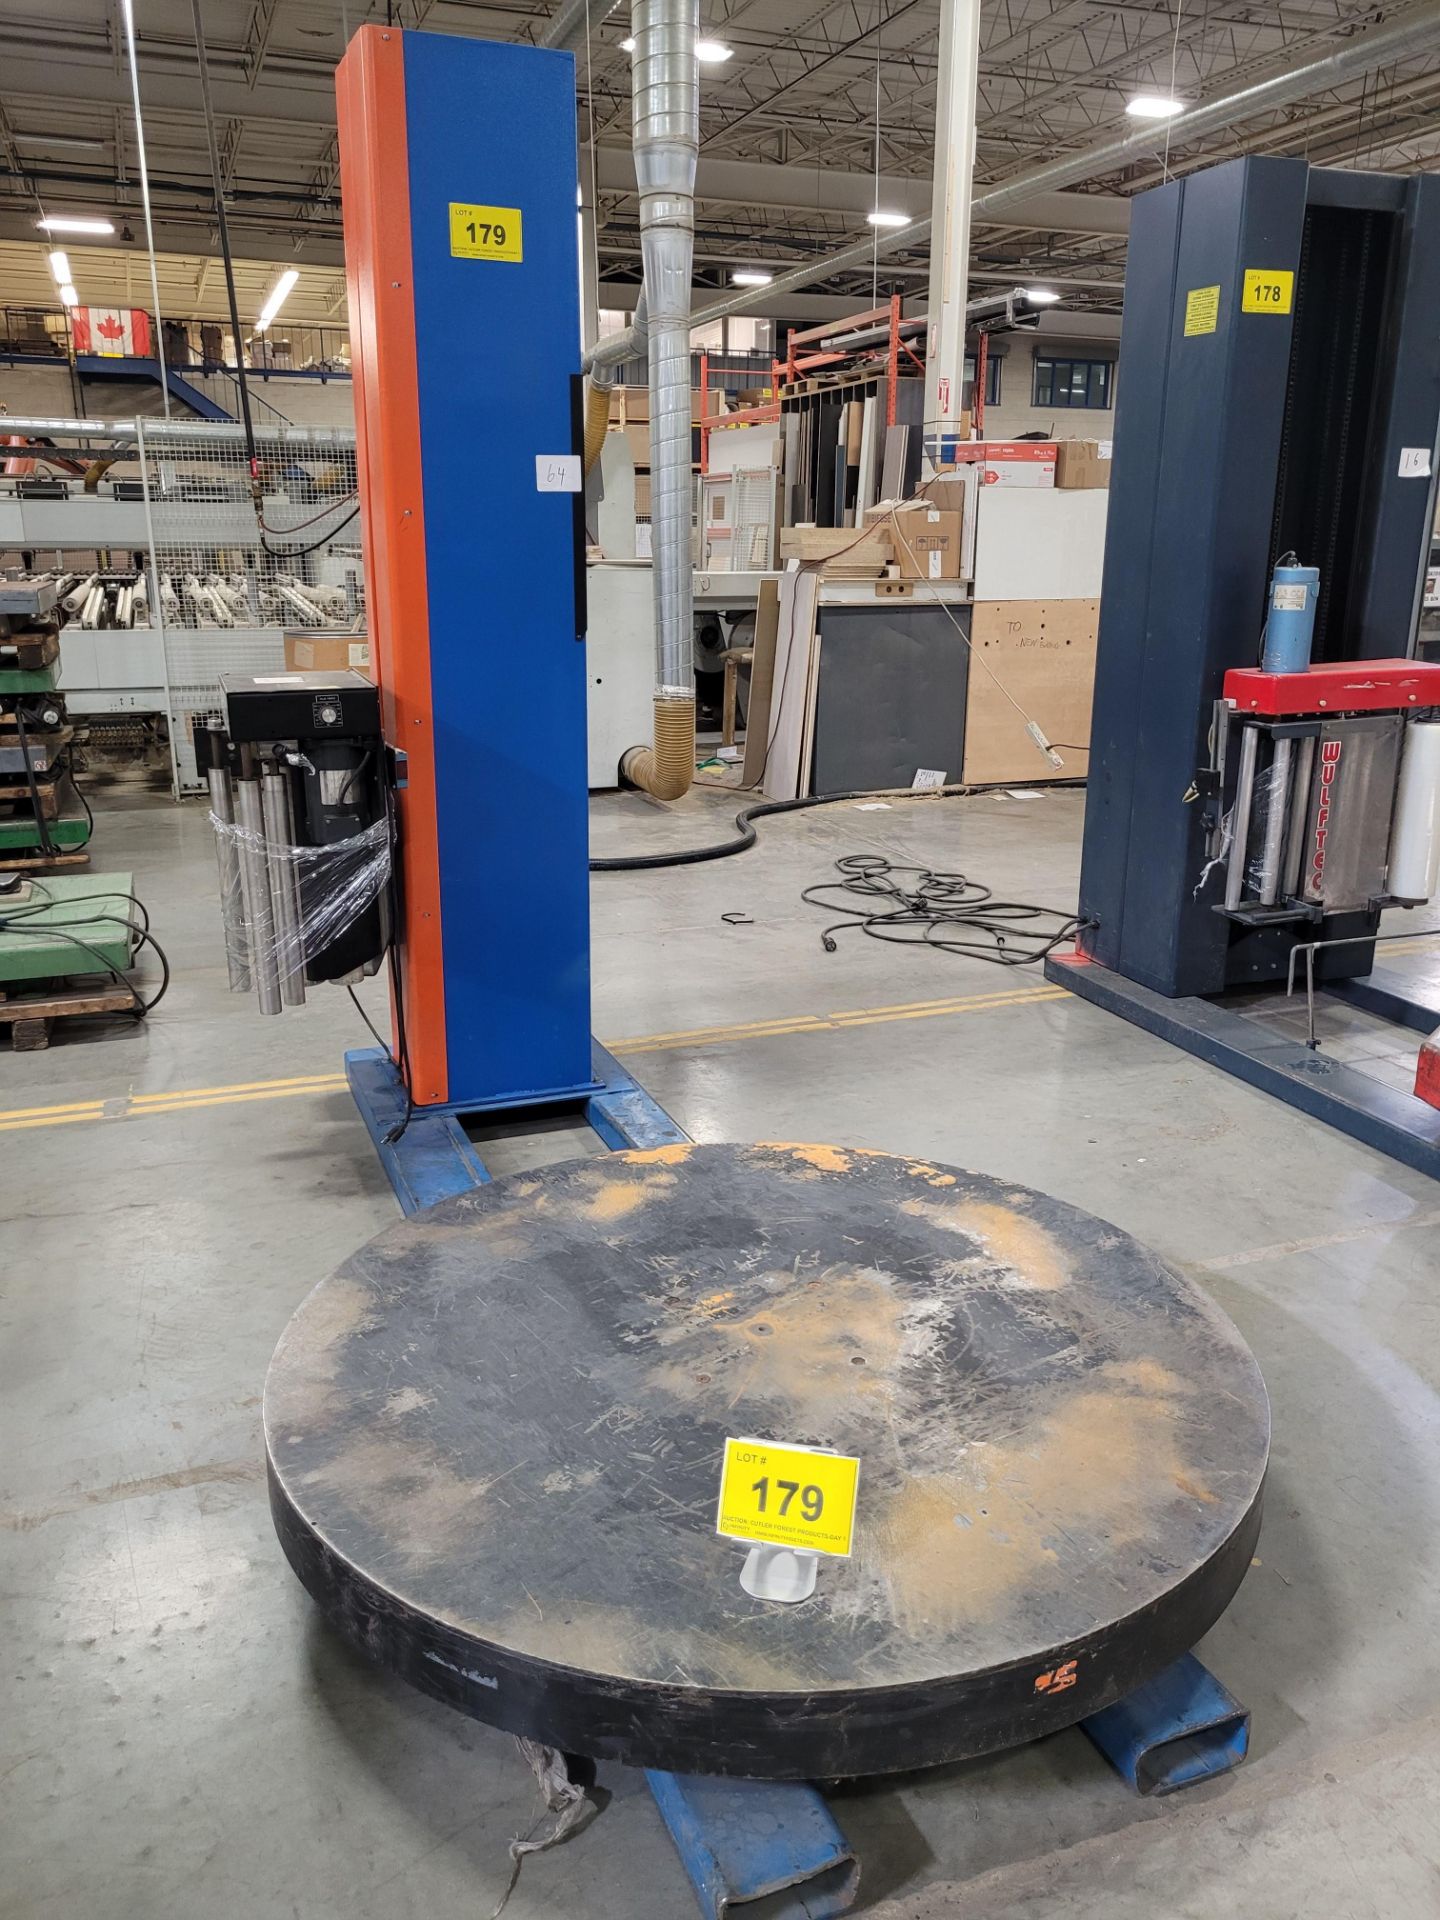 FOX C4 48" TURNTABLE TYPE AUTOMATIC PALLET WRAPPER, S/N: C4-092412-166